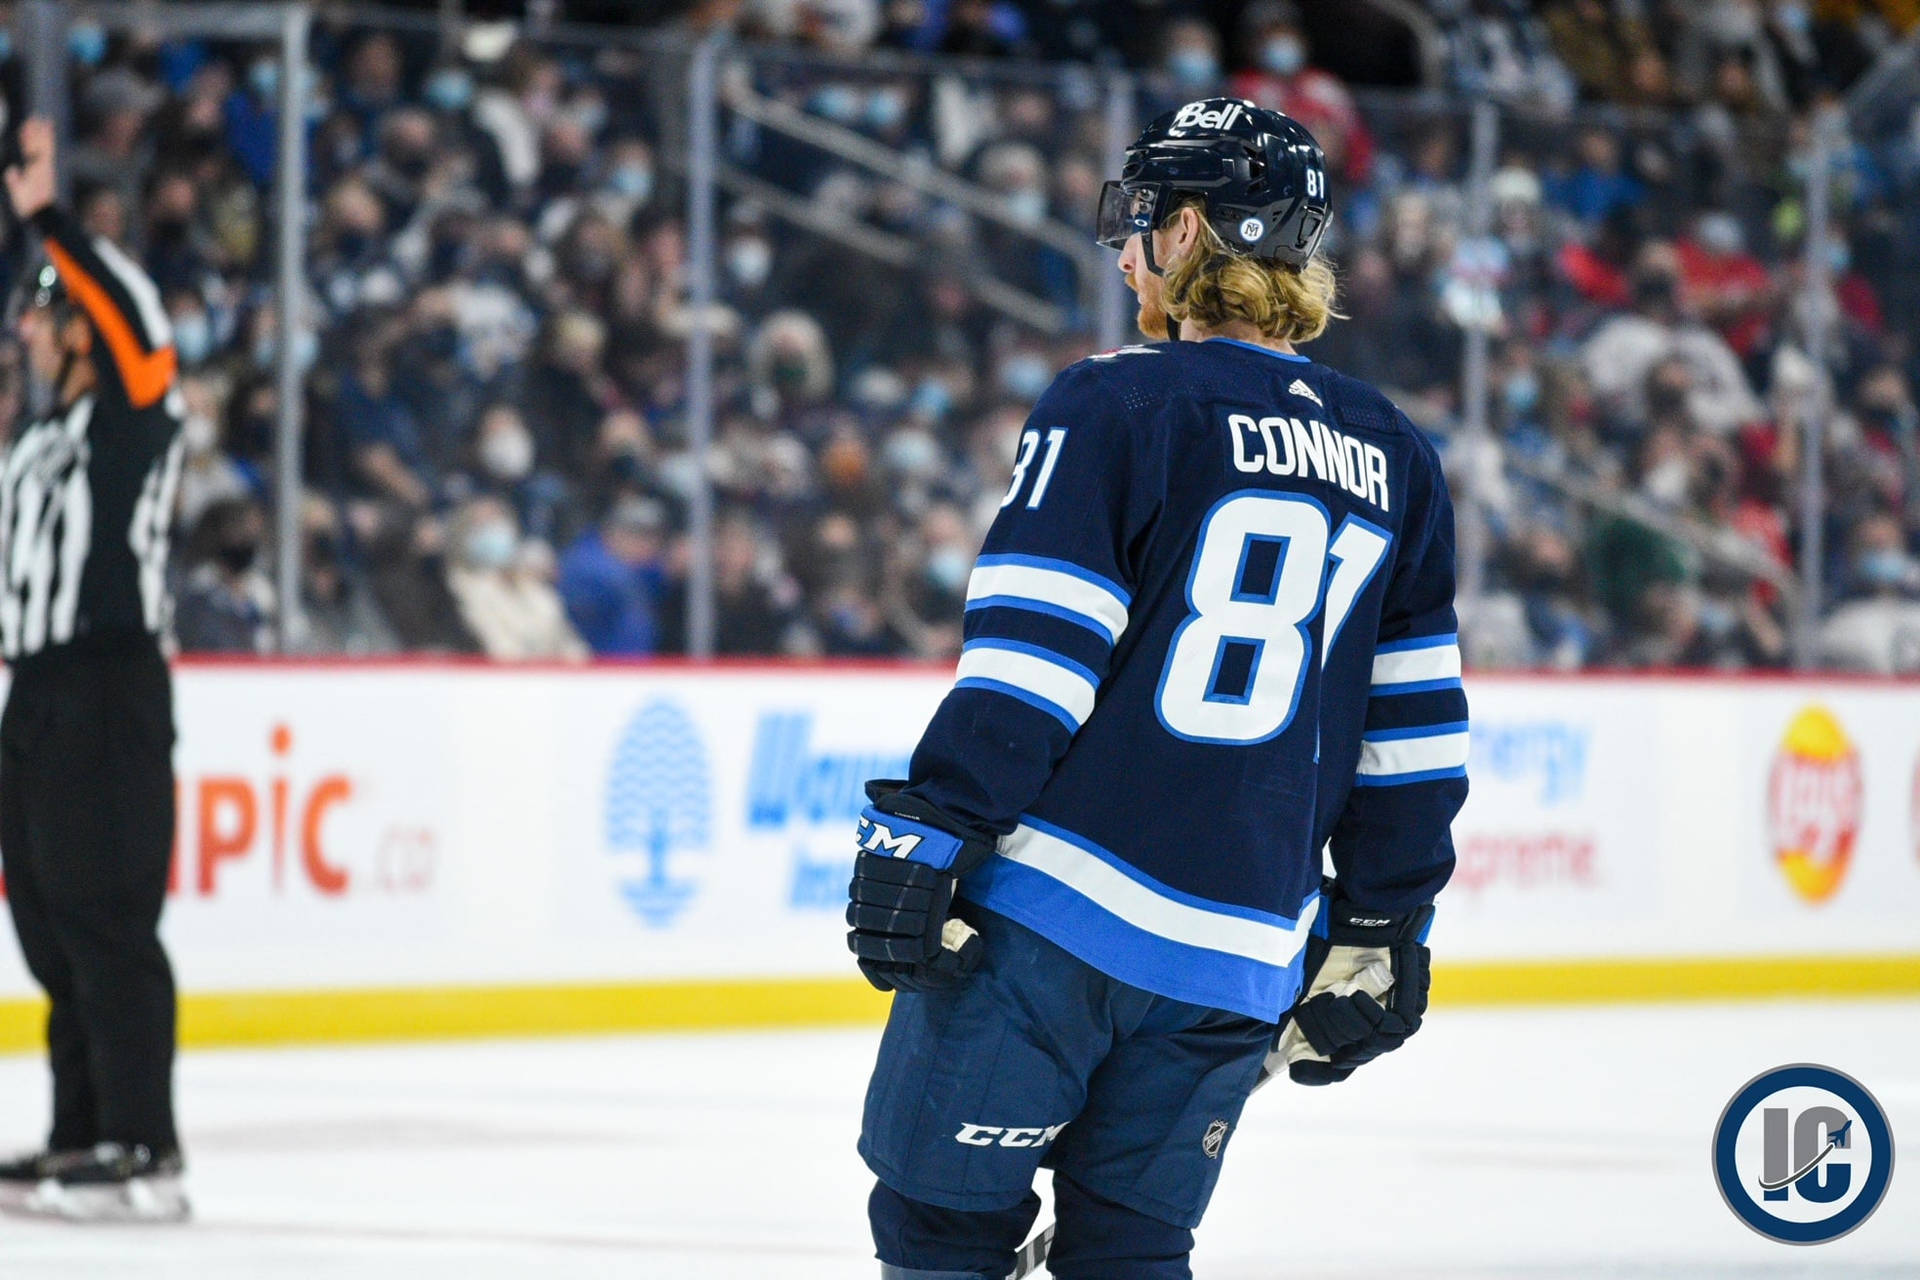 Kyle Connor of the Winnipeg Jets in action on the ice. Wallpaper